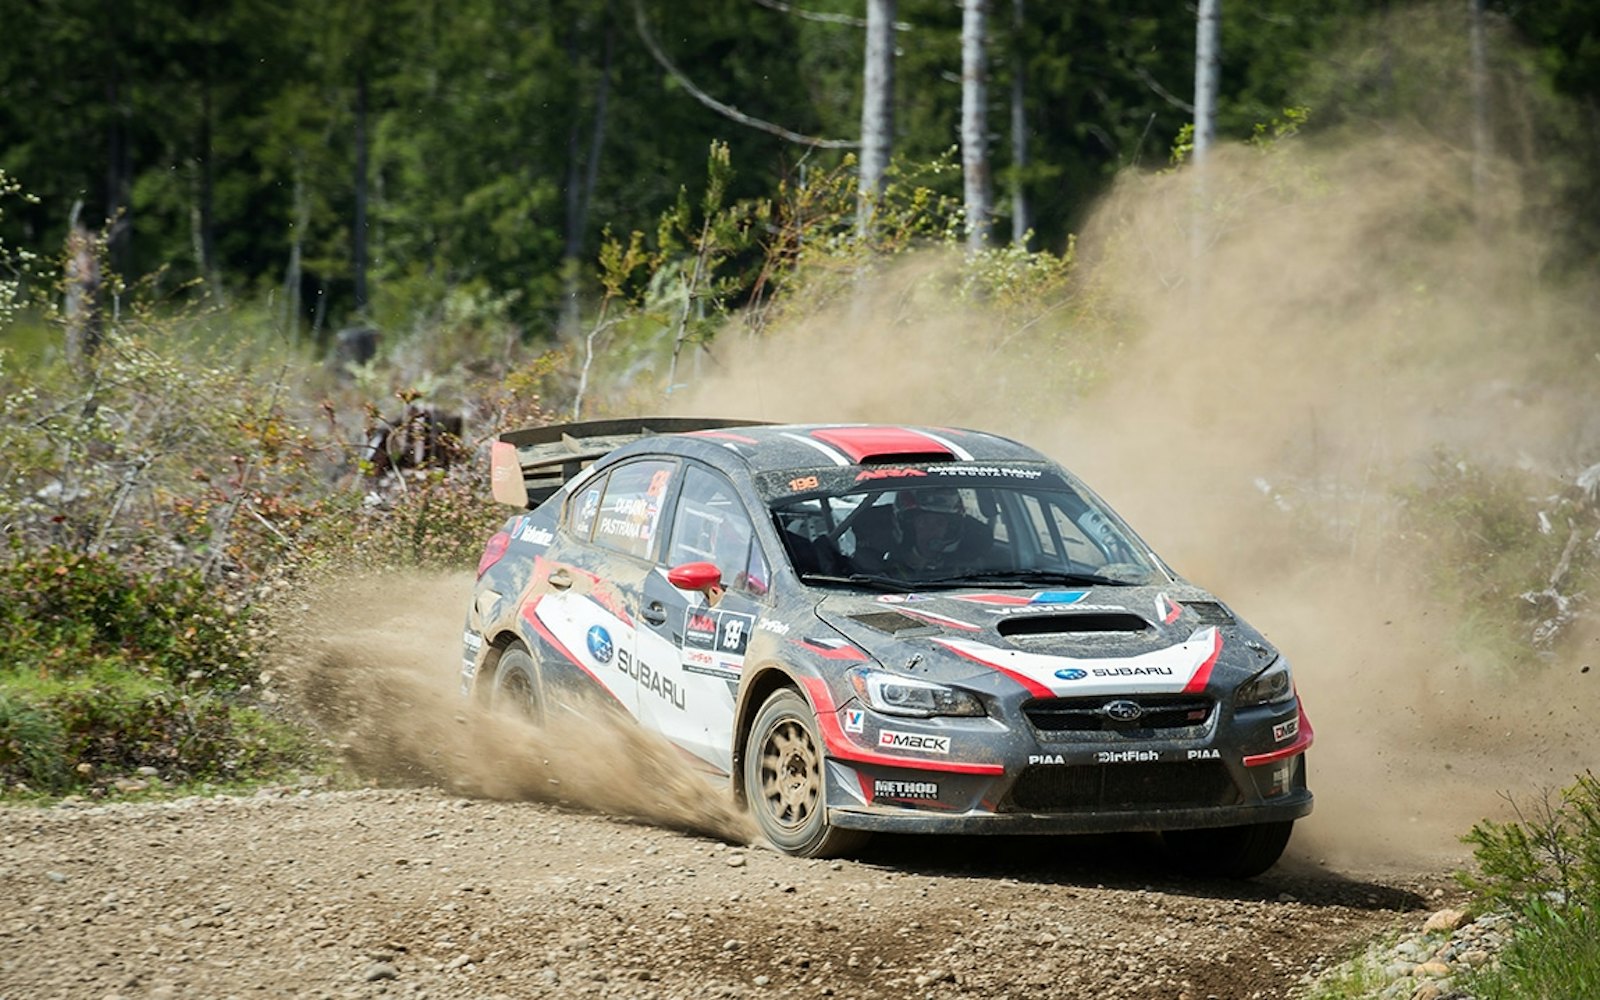 Travis_Pastrana_and_codriver_Robbie_Durant_finished_2nd_to_teammate_Higgins_at_the_Olympus_Rally